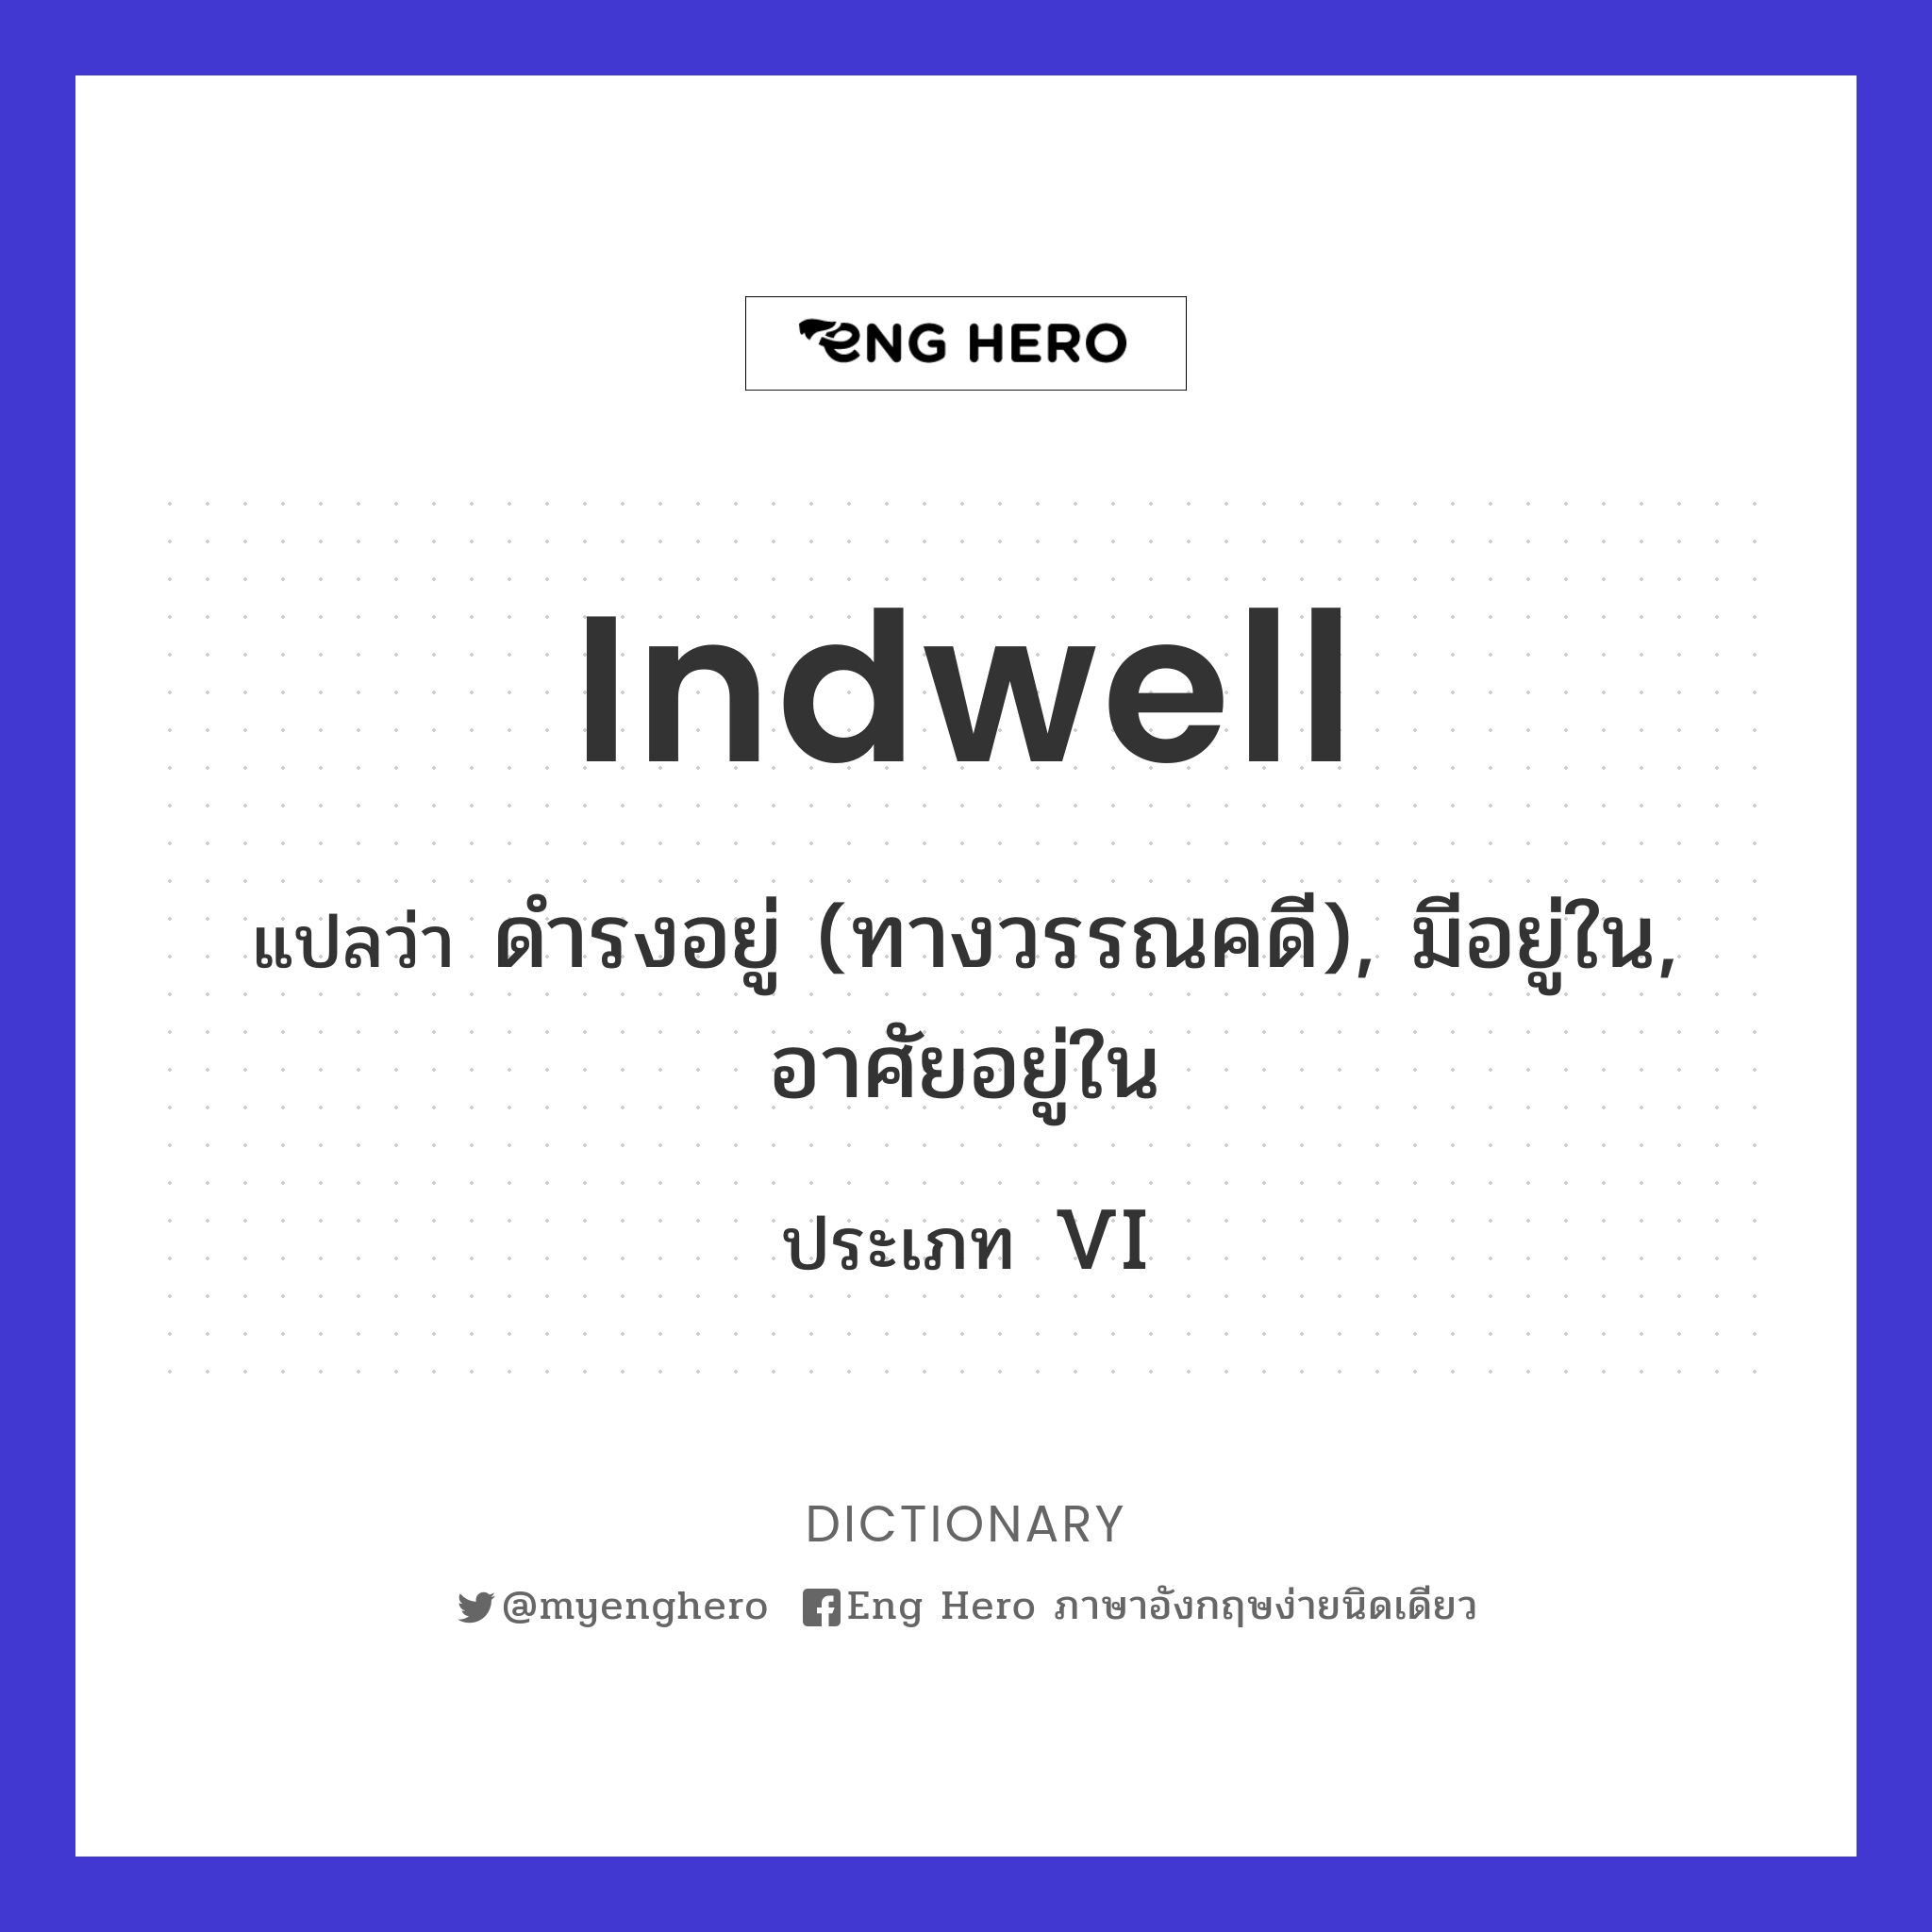 indwell